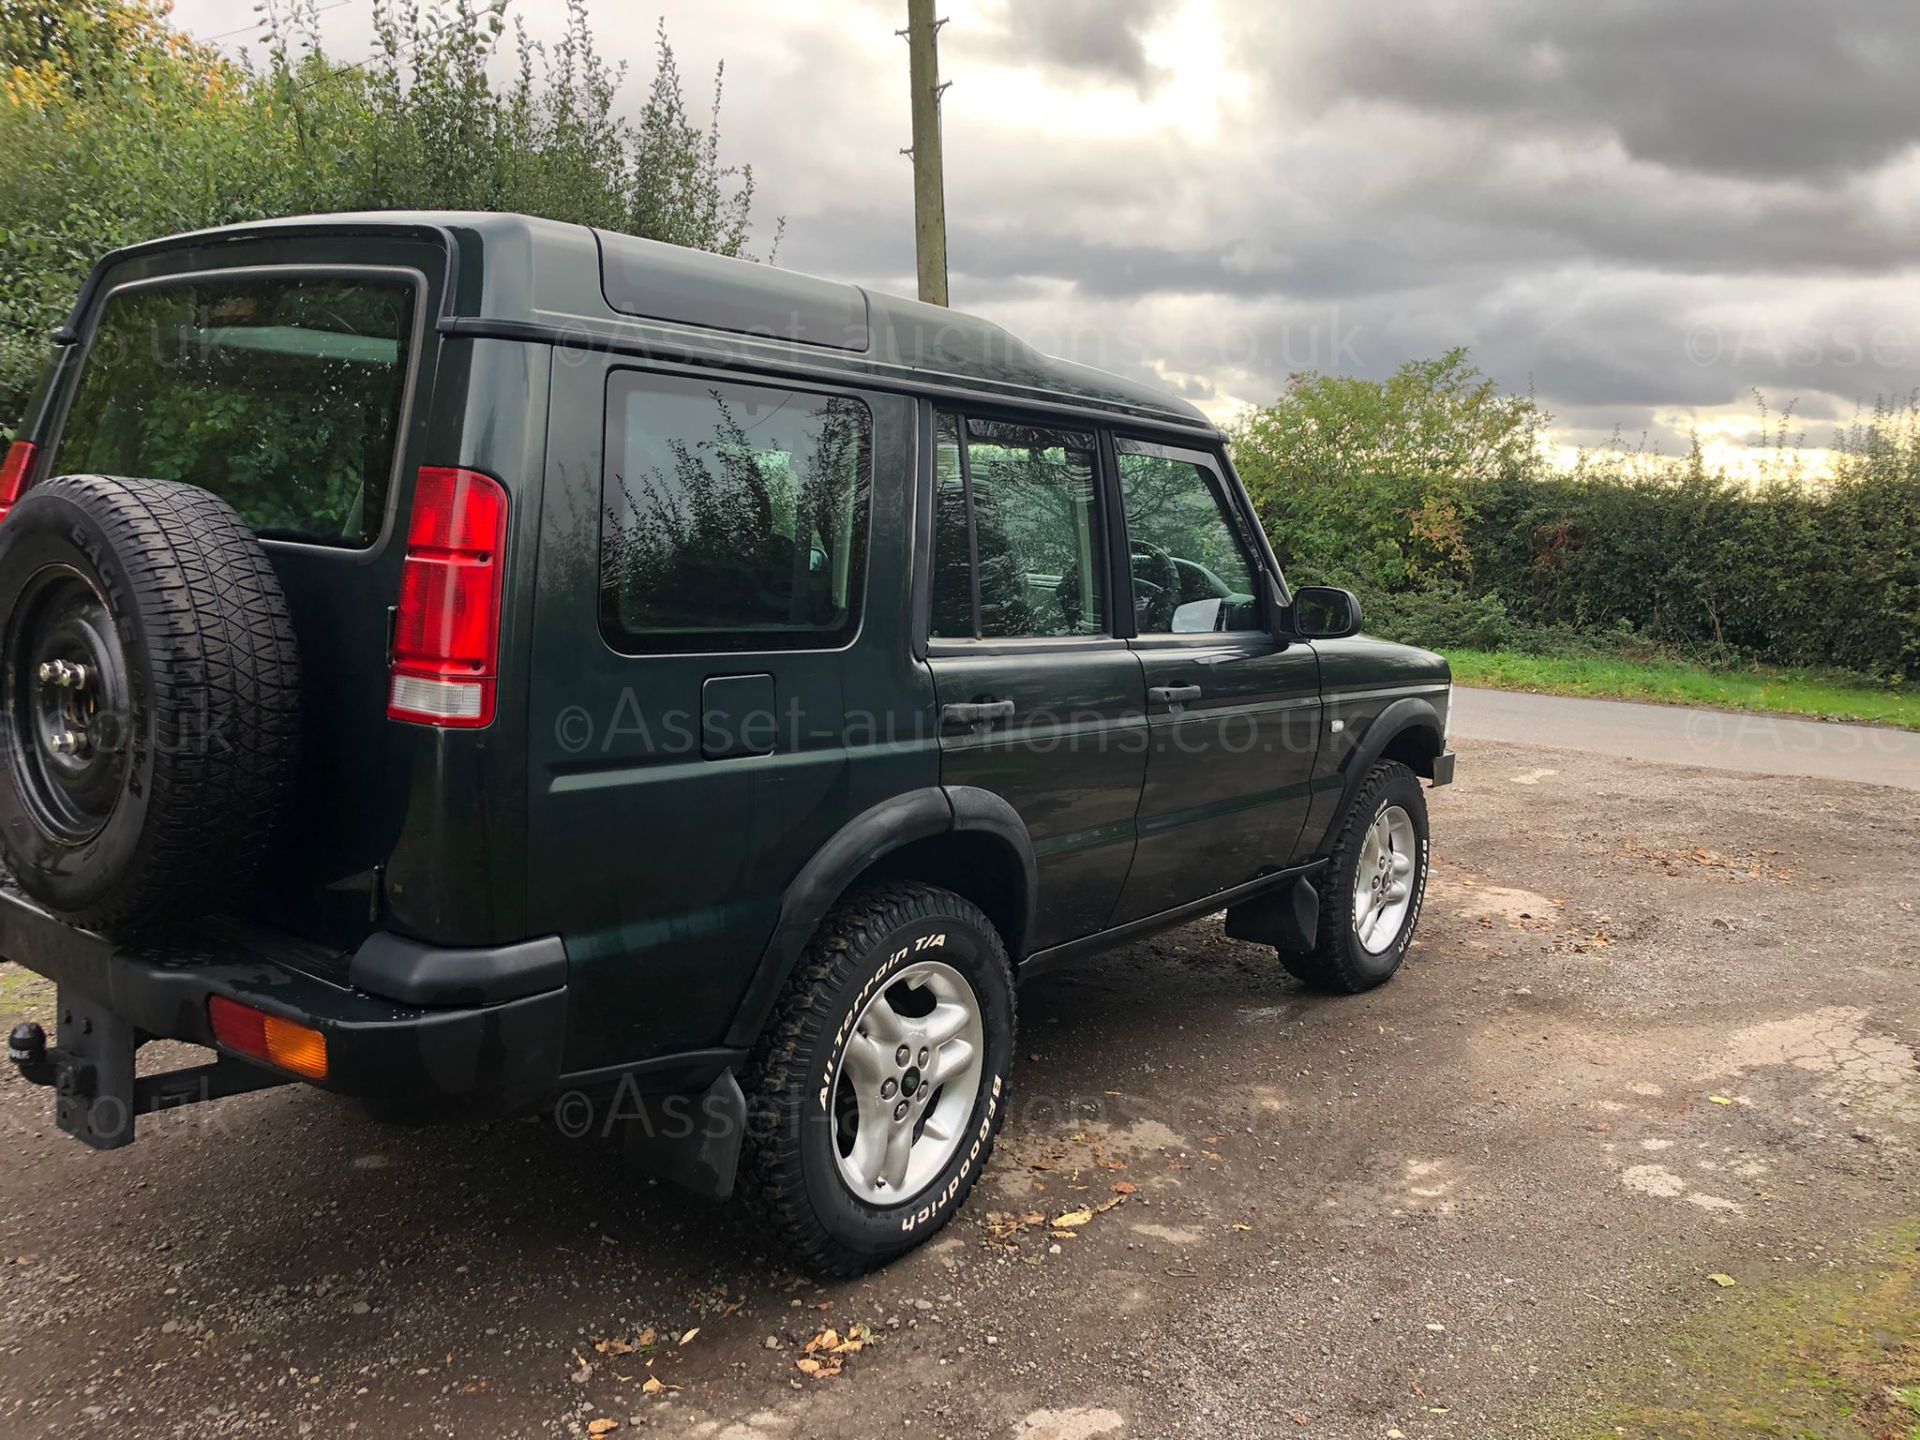 2002 LAND ROVER DISCOVERY TD5 S AUTO GREEN ESTATE, 139,862 MILES, 2.5 DIESEL *NO VAT* - Image 7 of 16